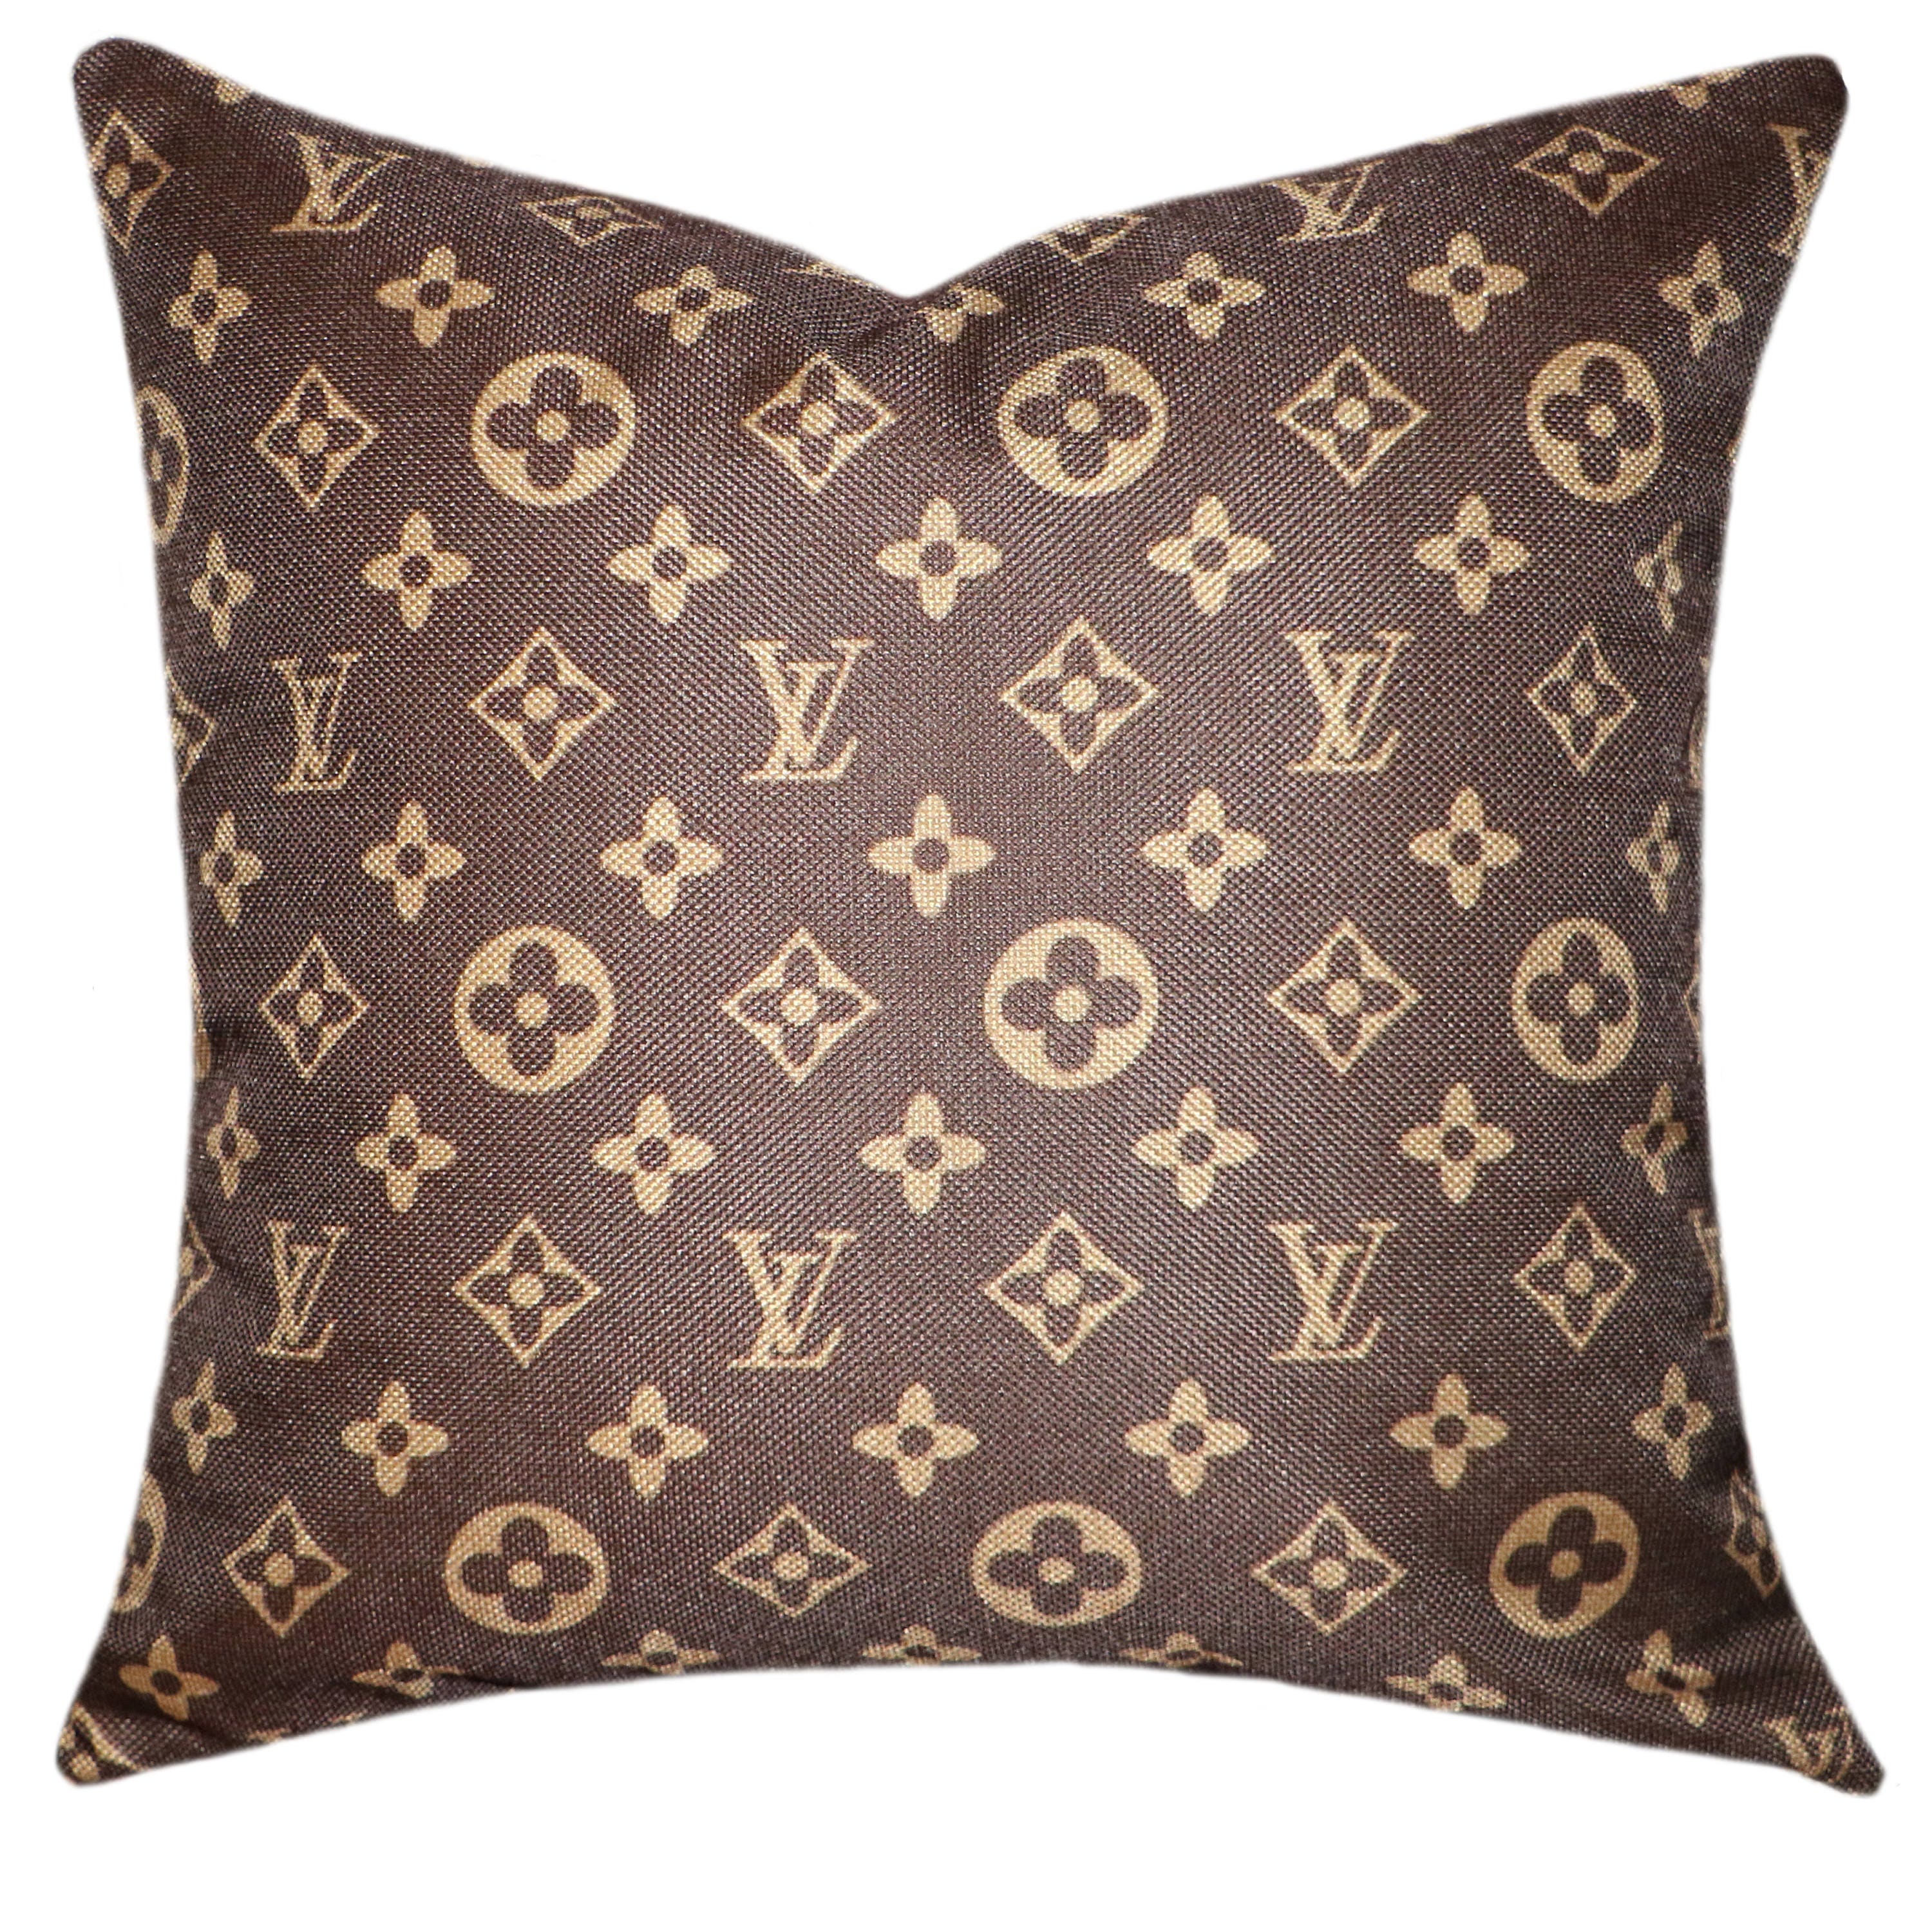 Louis Vuitton Inspired Classic Monogram Pillow Cover